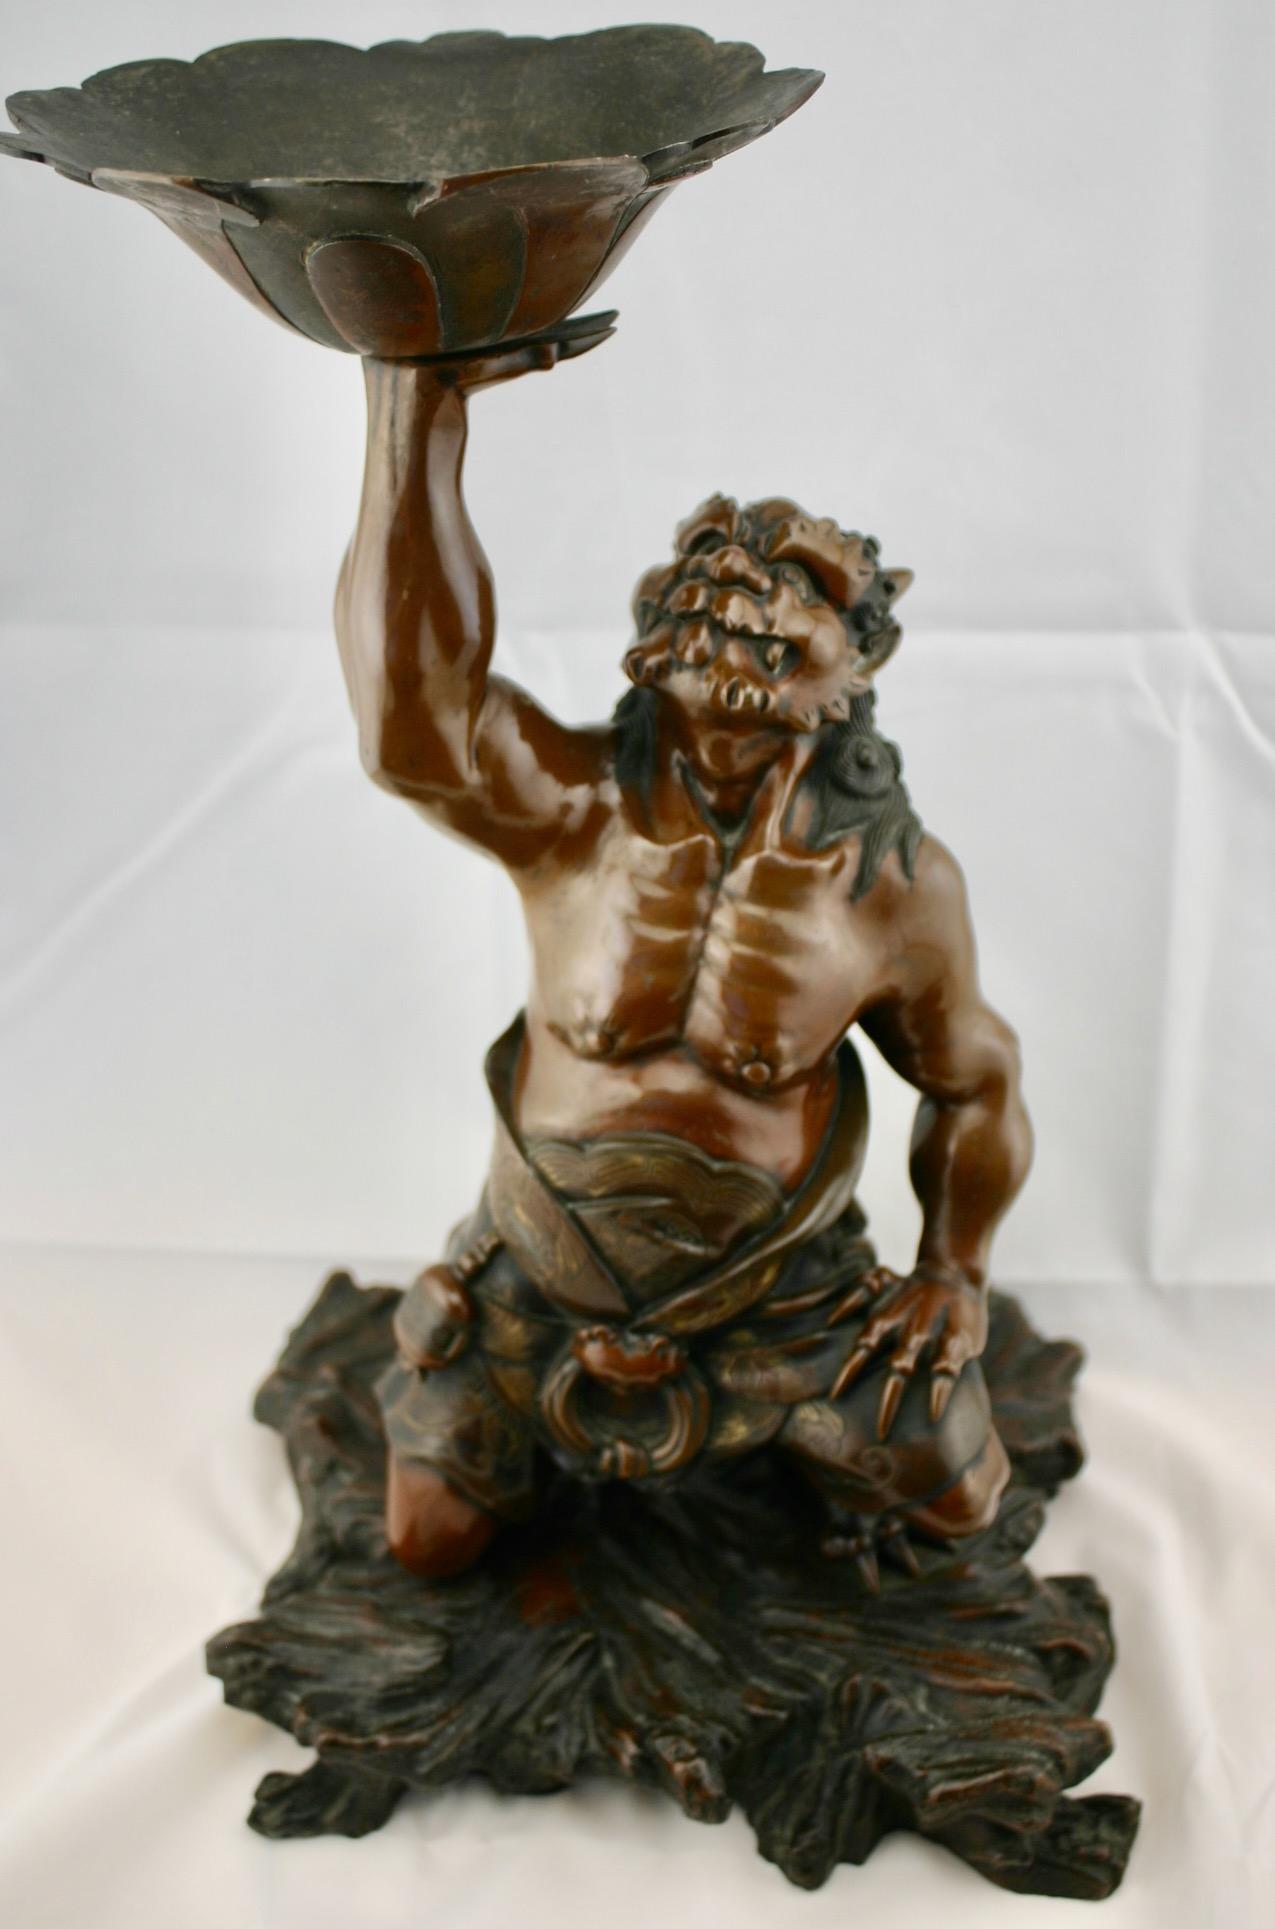 Japanese Meiji period finely cast, patinated and partially gilded figure of Oni holding a lotus flower. Very fine and detailed decoration. No signature located. The figure is 17 1/2